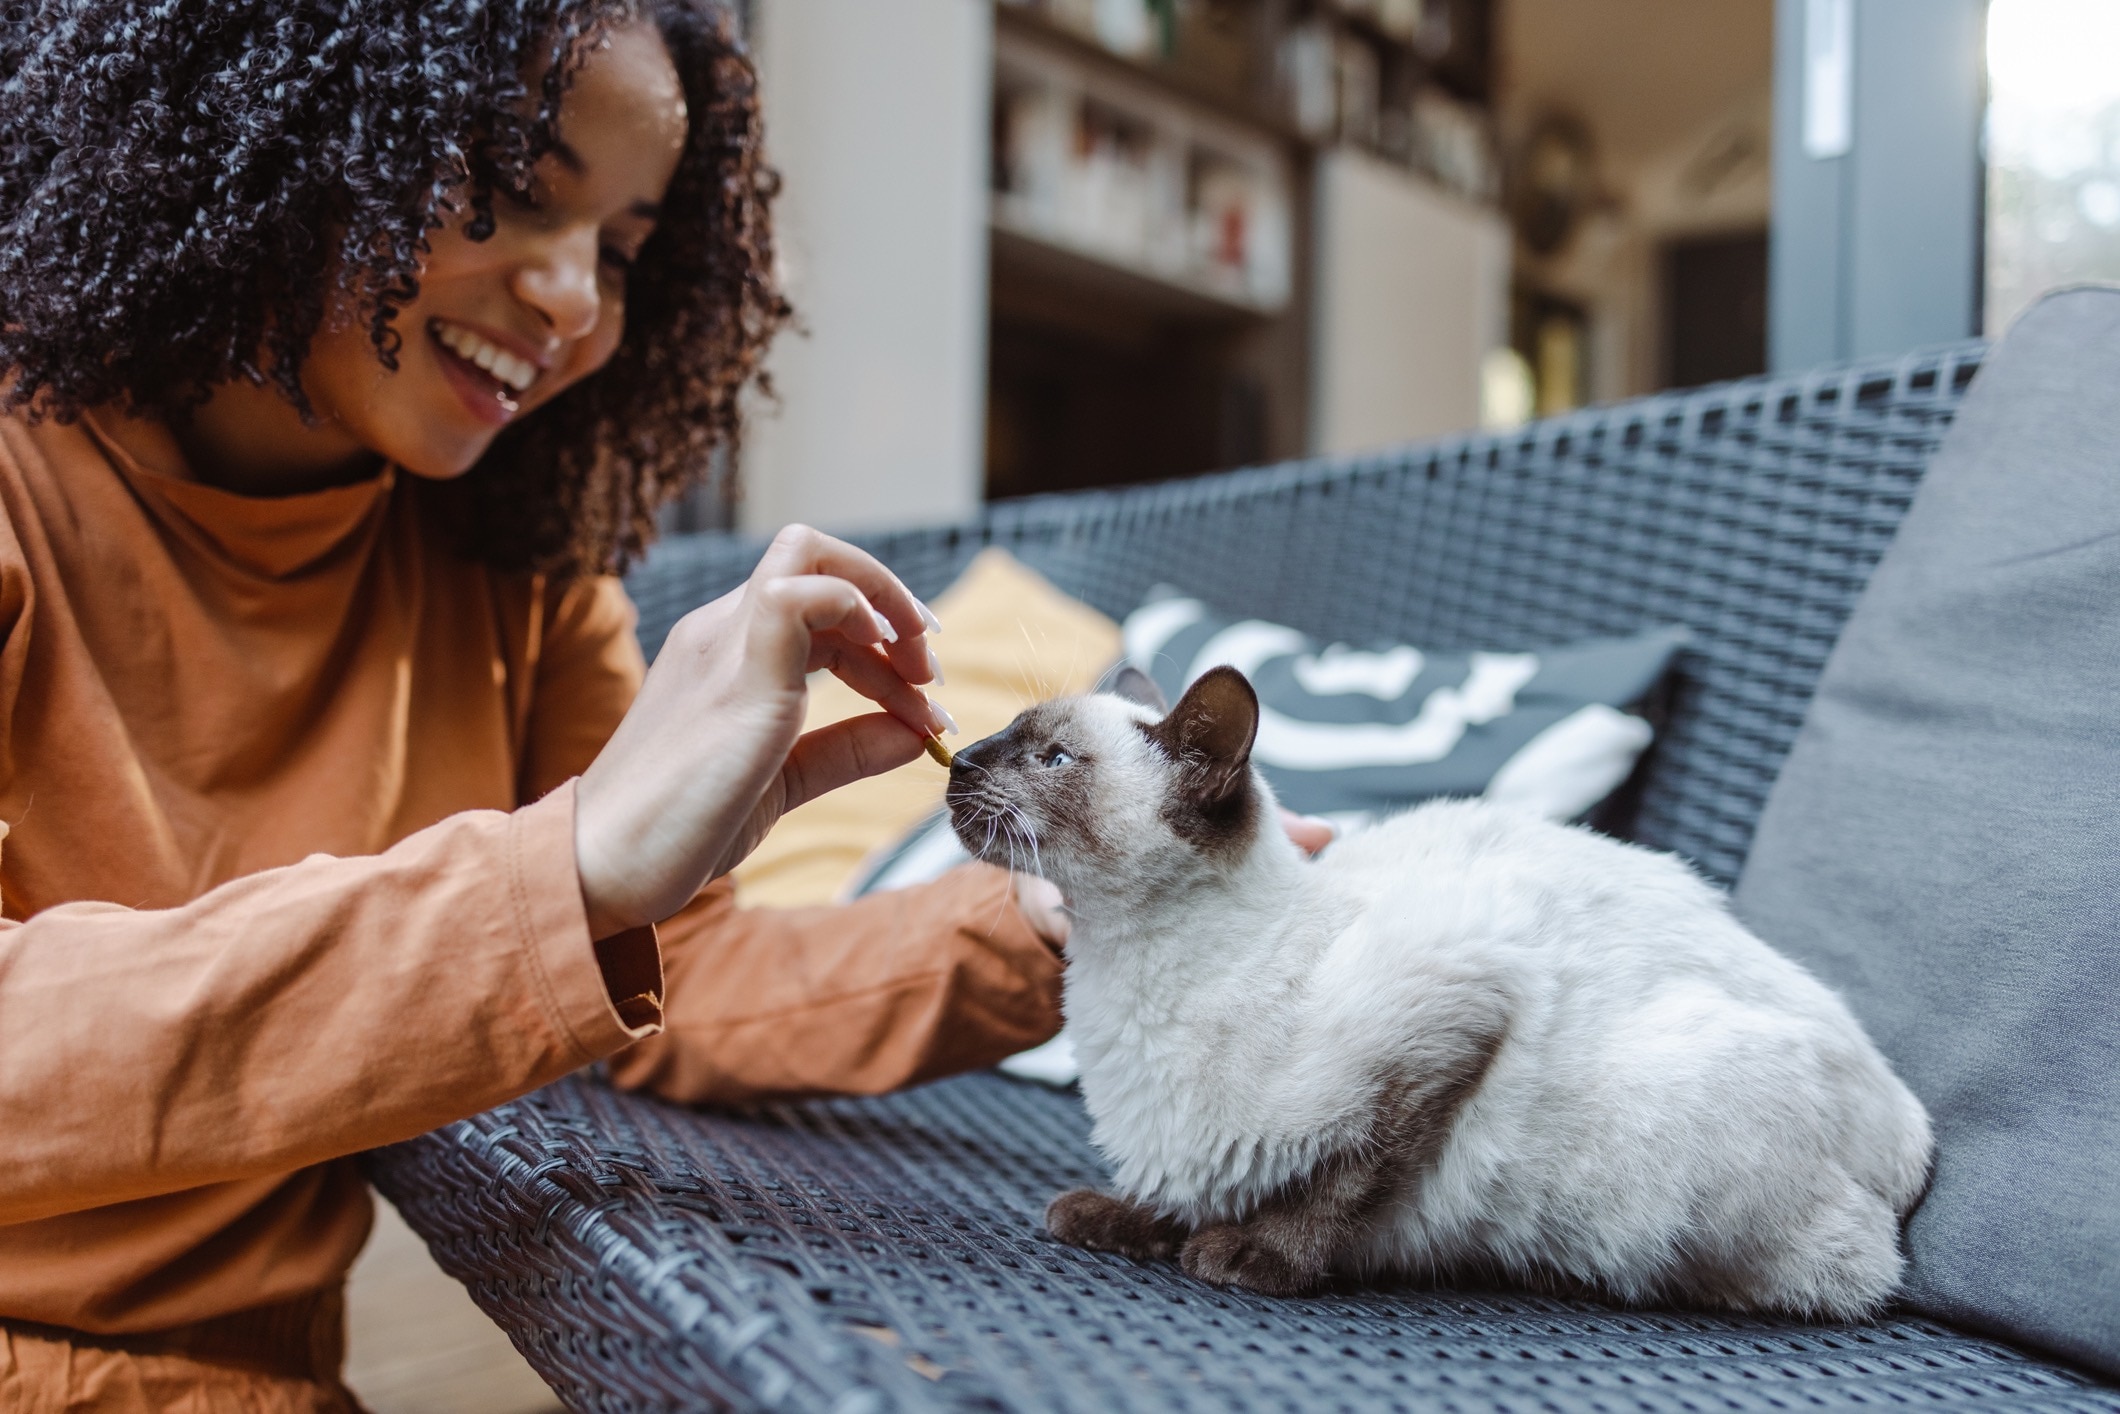 woman giving a siamese cat a treat